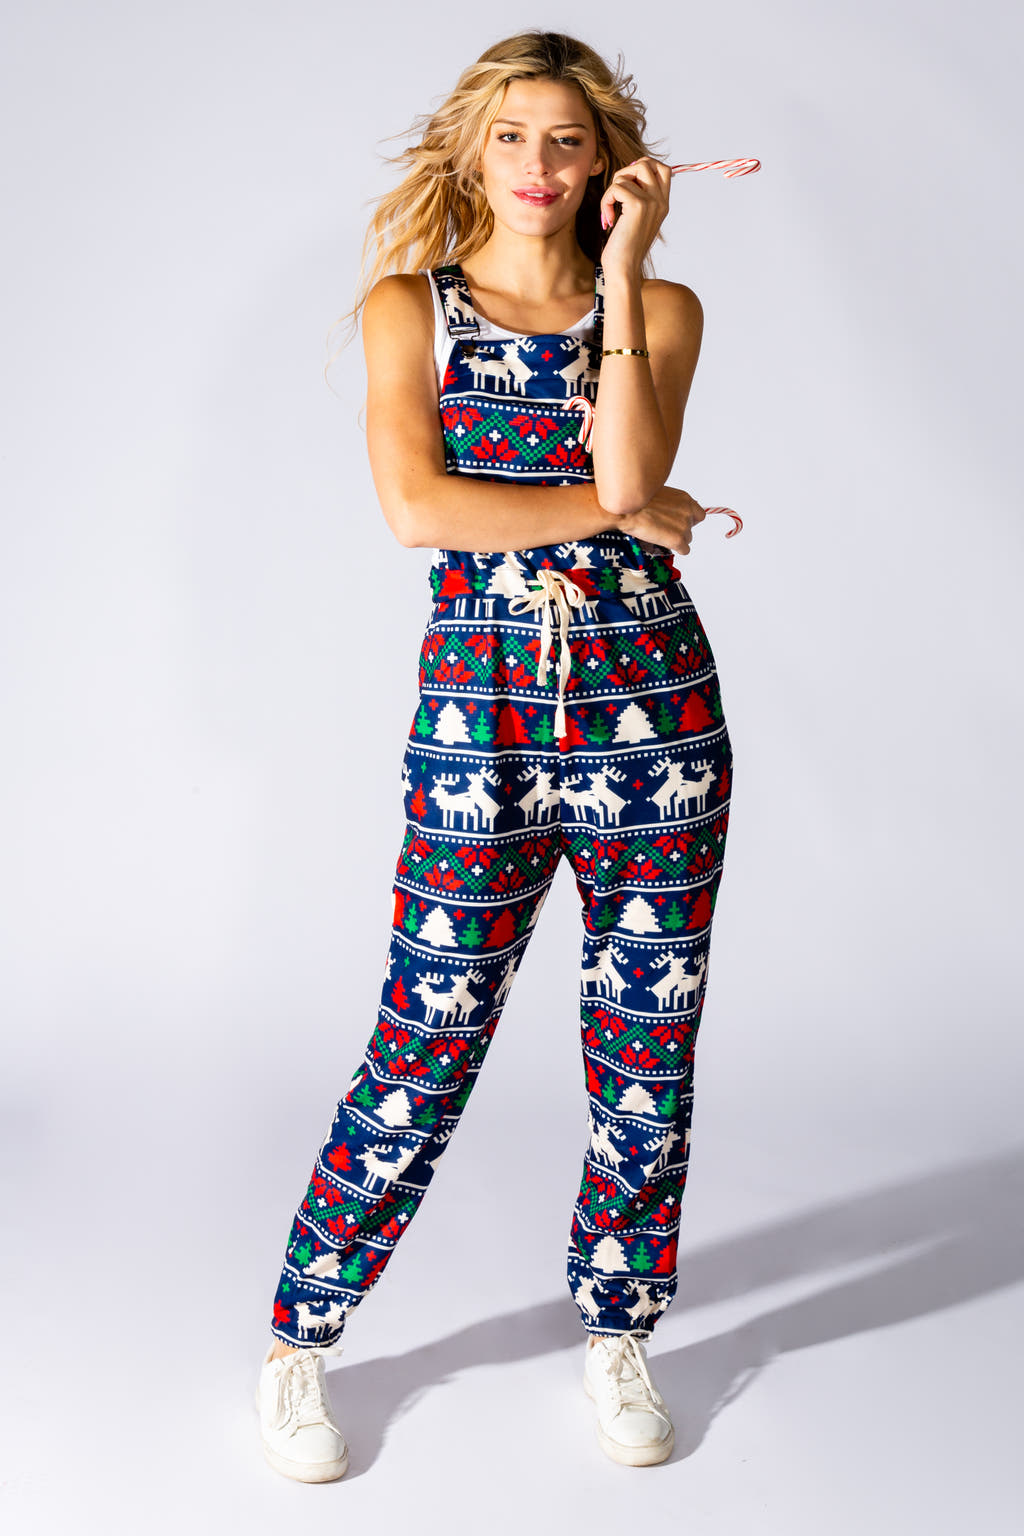 Deer Themed Holiday Pajamaralls for Women